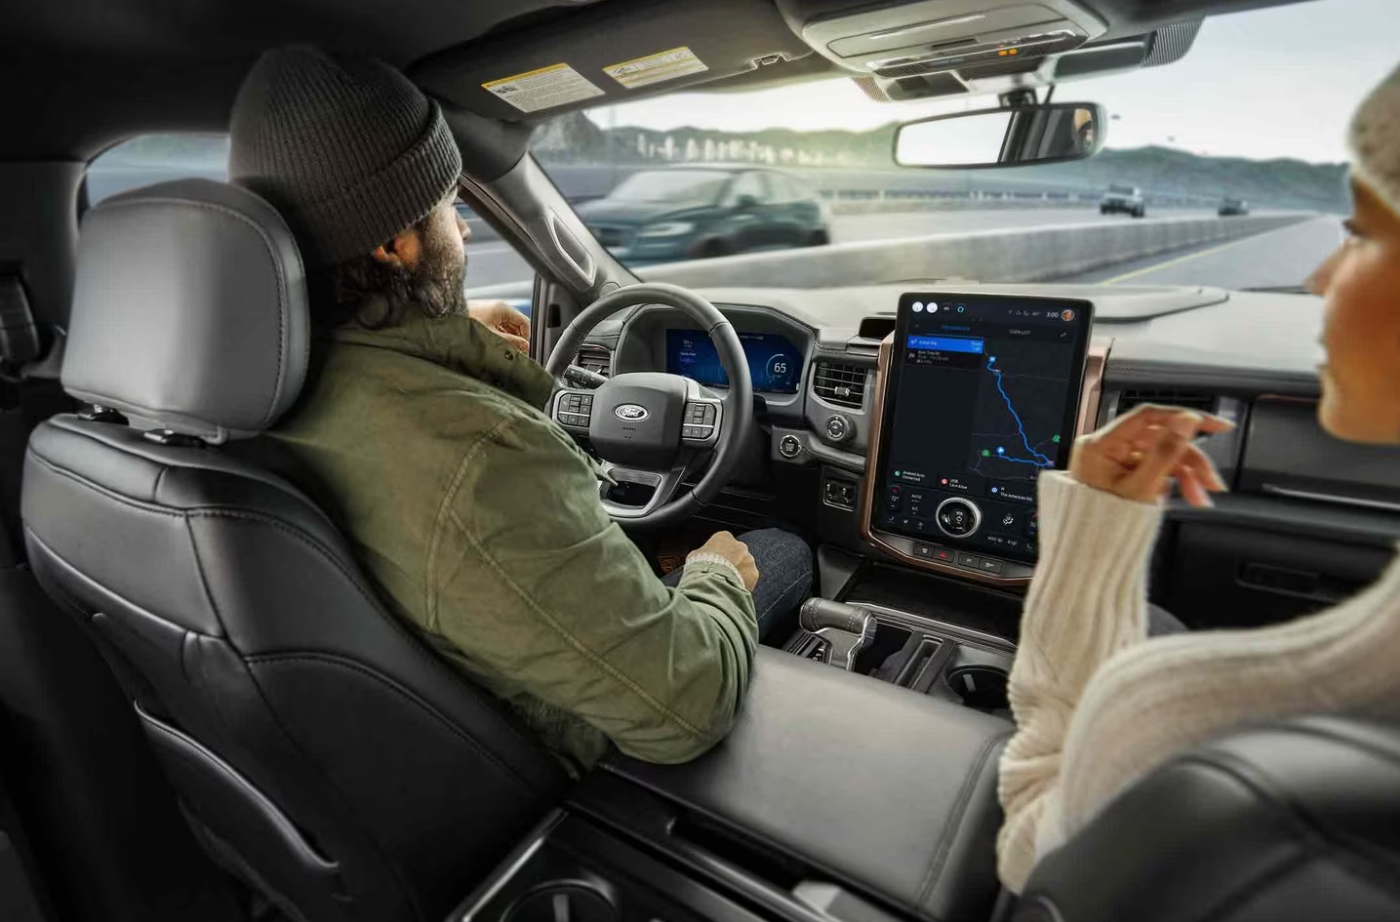 A man sits in the driver's seat of a Ford showing the infotainment system, dash, and safety systems available to him